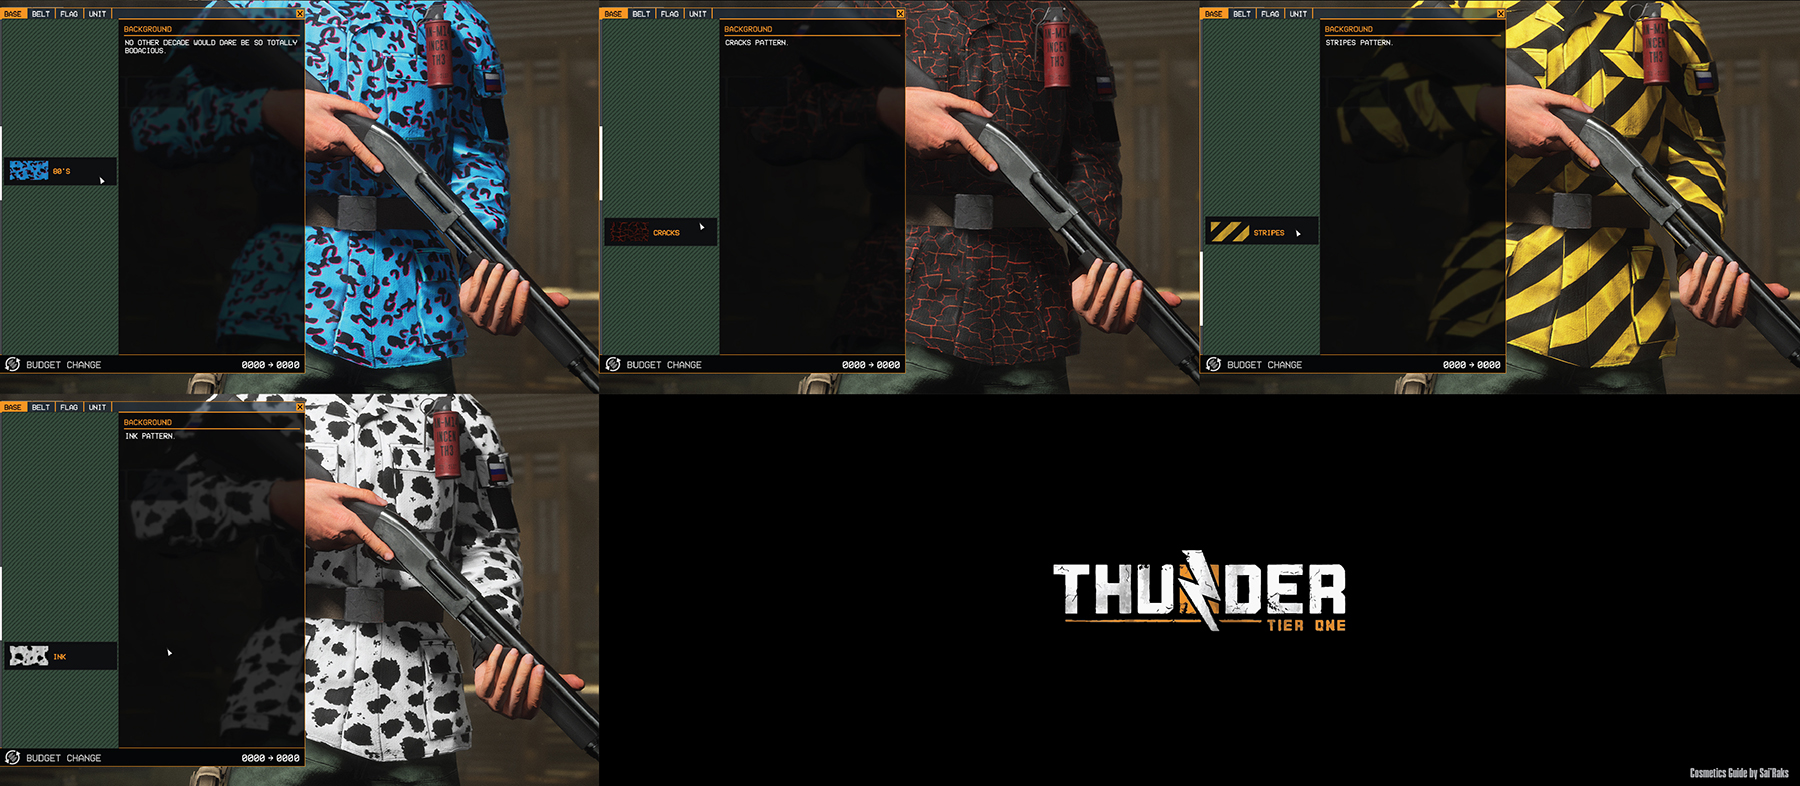 Thunder Tier One Customization and Unlocks guide (with Pictures) - Camos, colors - 946294C